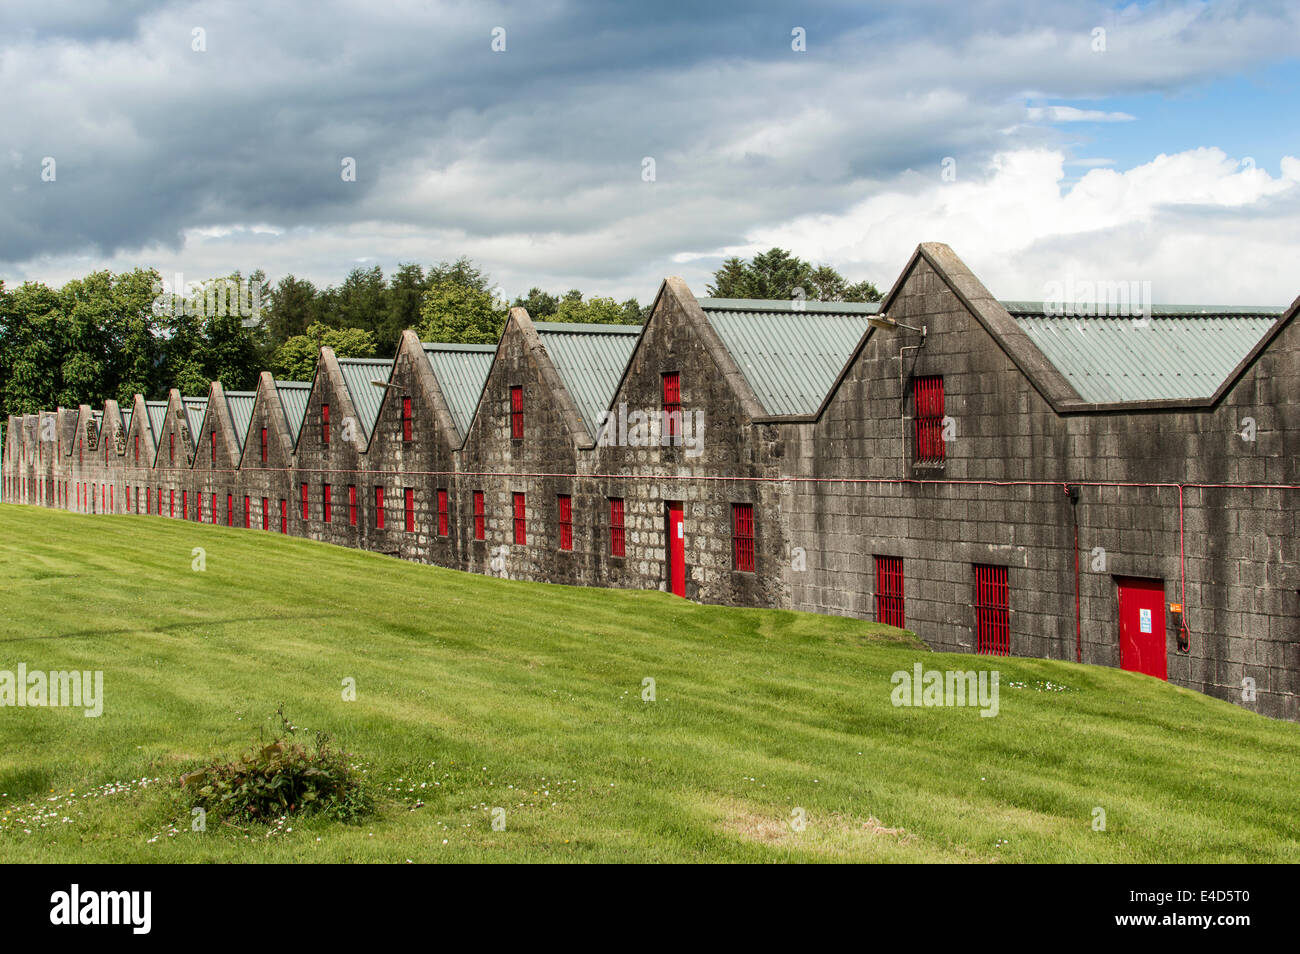 SCOTTISH WHISKY WAREHOUSES WITH RED WINDOWS AND DOORS IN KENNETHMONT ABERDEENSHIRE Stock Photo